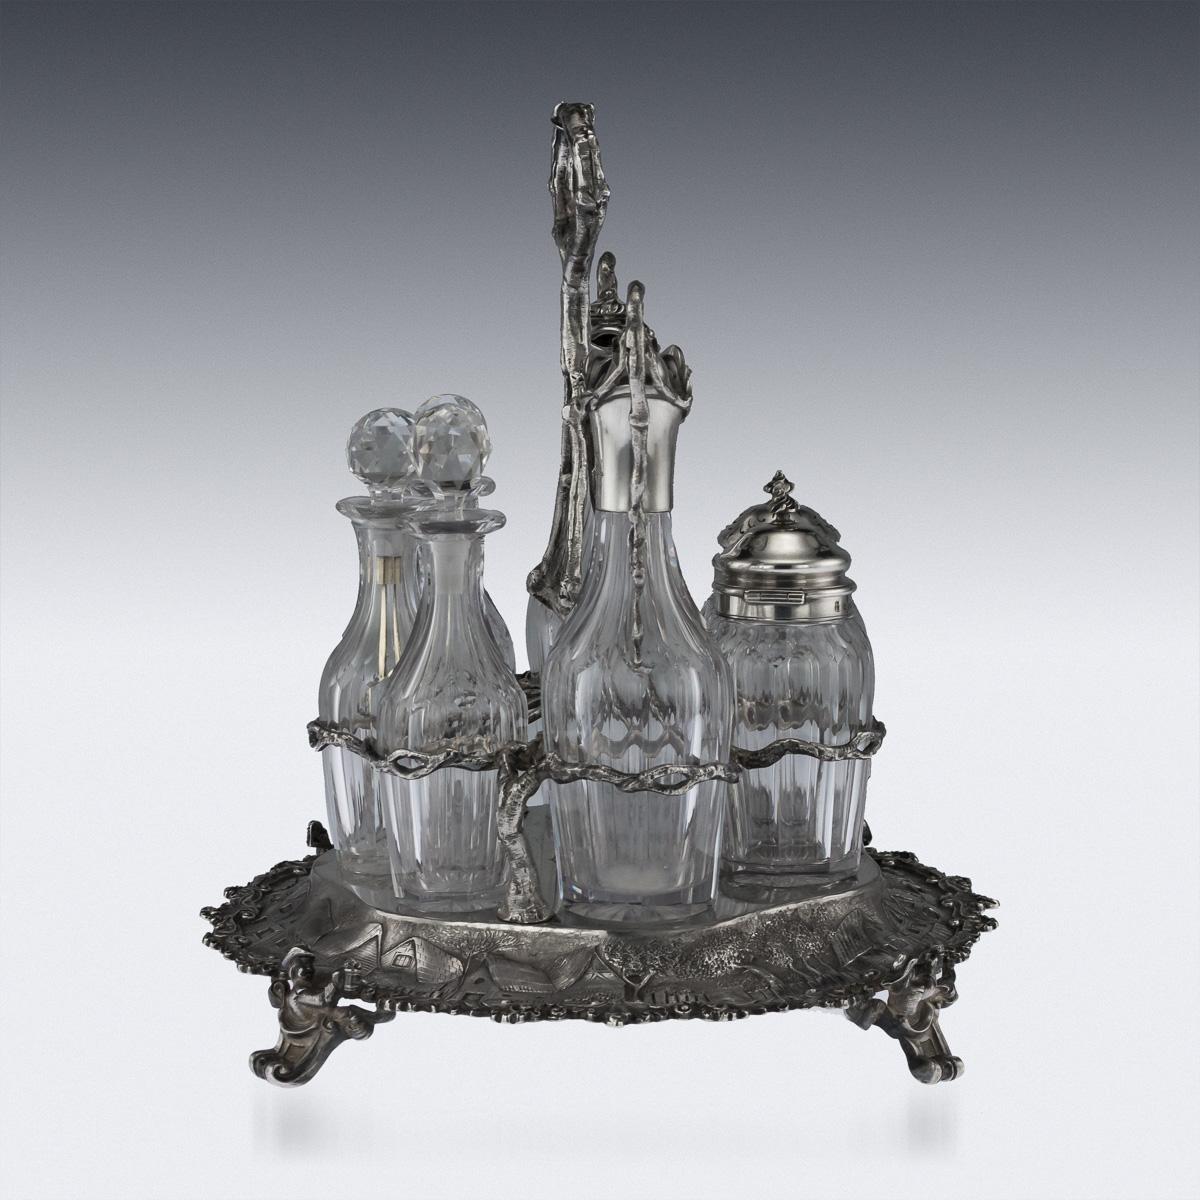 Antique 19th century Victorian extremely rare solid silver and glass condiment set, comprising a cruet Stand, five sauce bottles and two silver lidded condiment jars, made in the 'Teniers' style, (a renowned Dutch painter), the base of the cruet